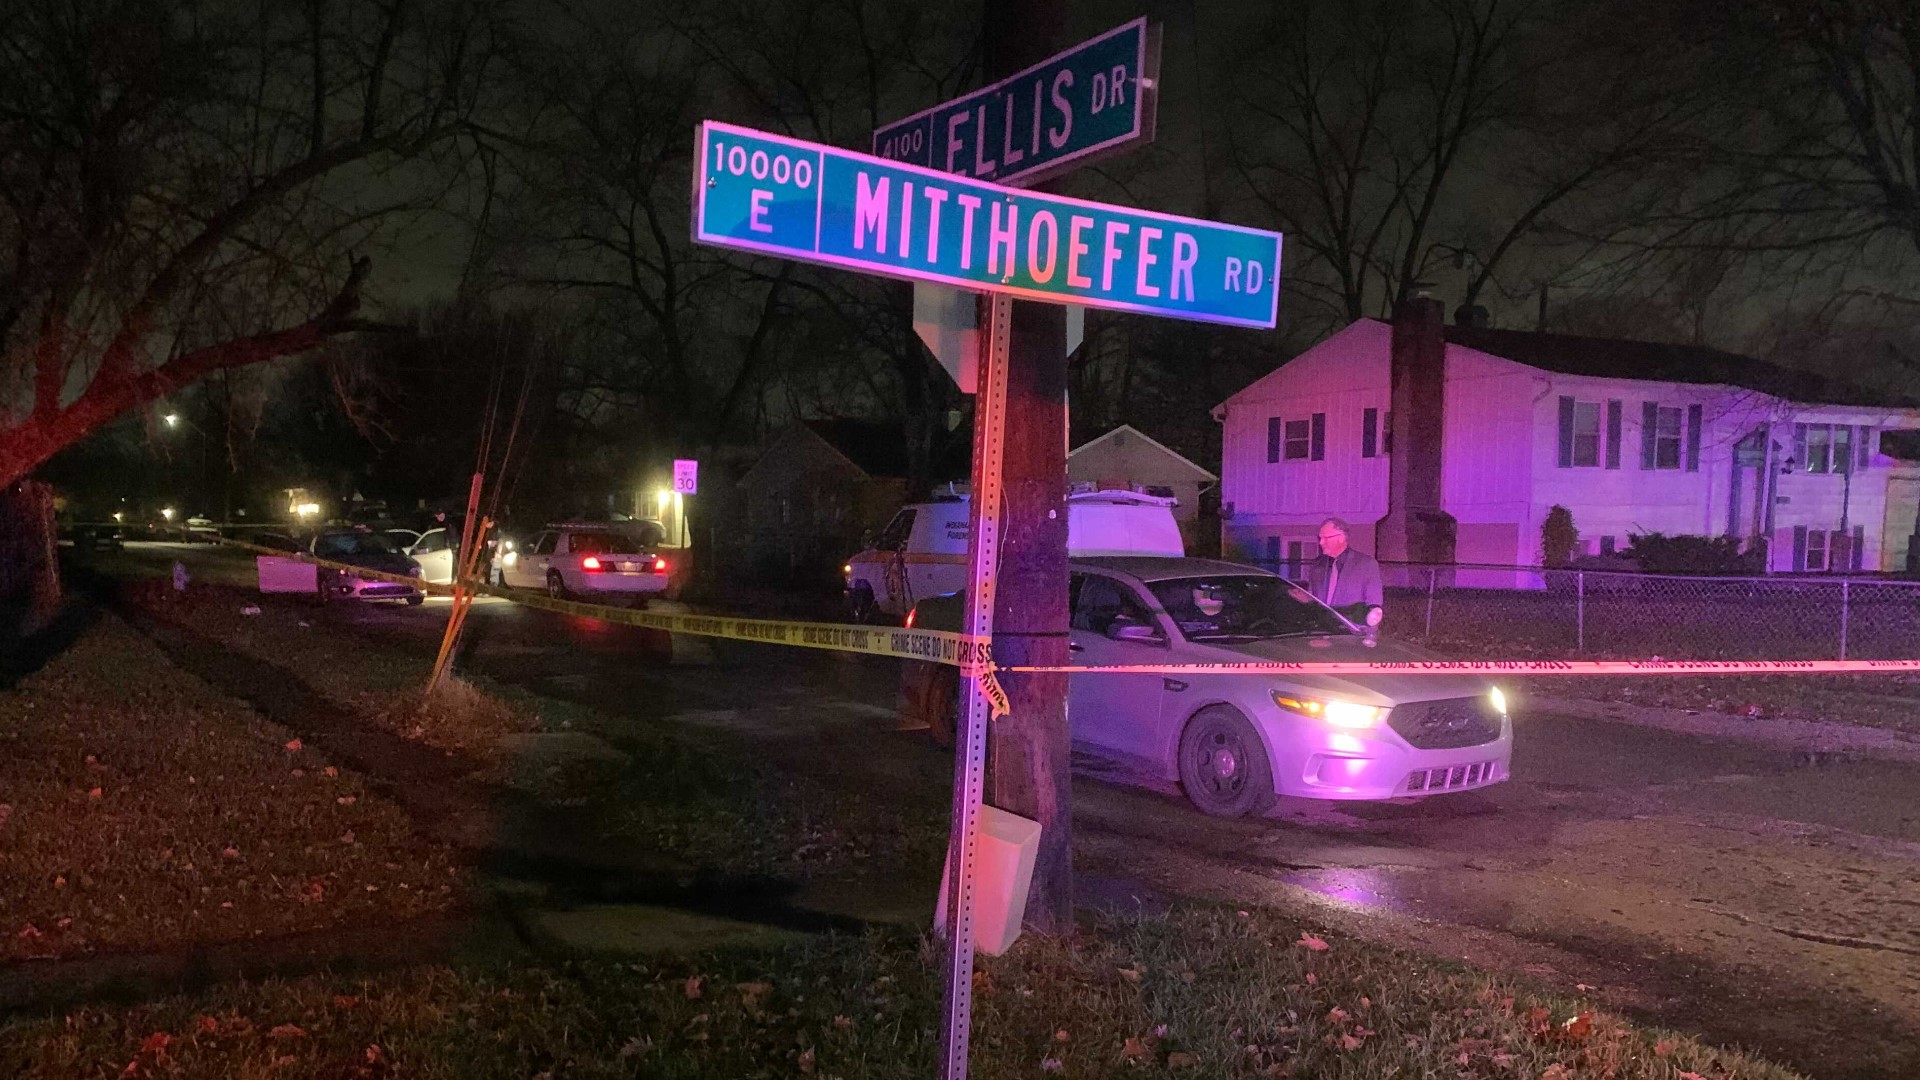 Officers located an 18-year-old female, who waved them down from a vehicle after being shot. She was taken to the hospital in critical condition but died.